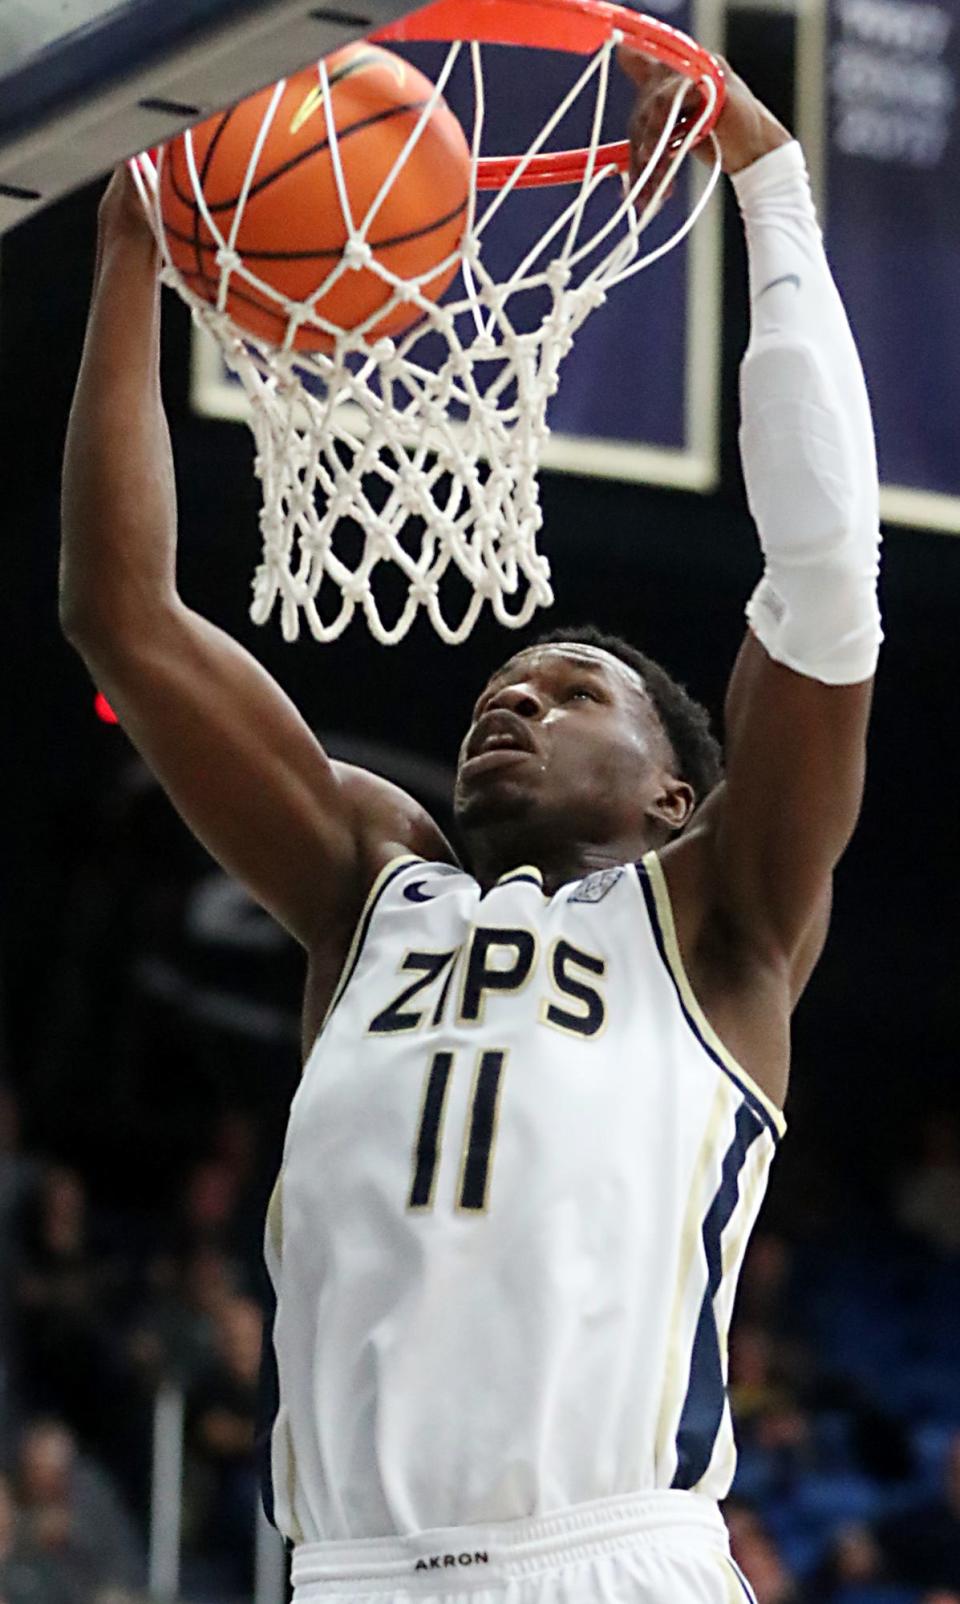 Akron's Sammy Hunter dunks against Eastern Michigan University during their MAC game at the University of Akron's James A. Rhodes Arena on Friday. The Zips beat the Eagles 104 to 67.